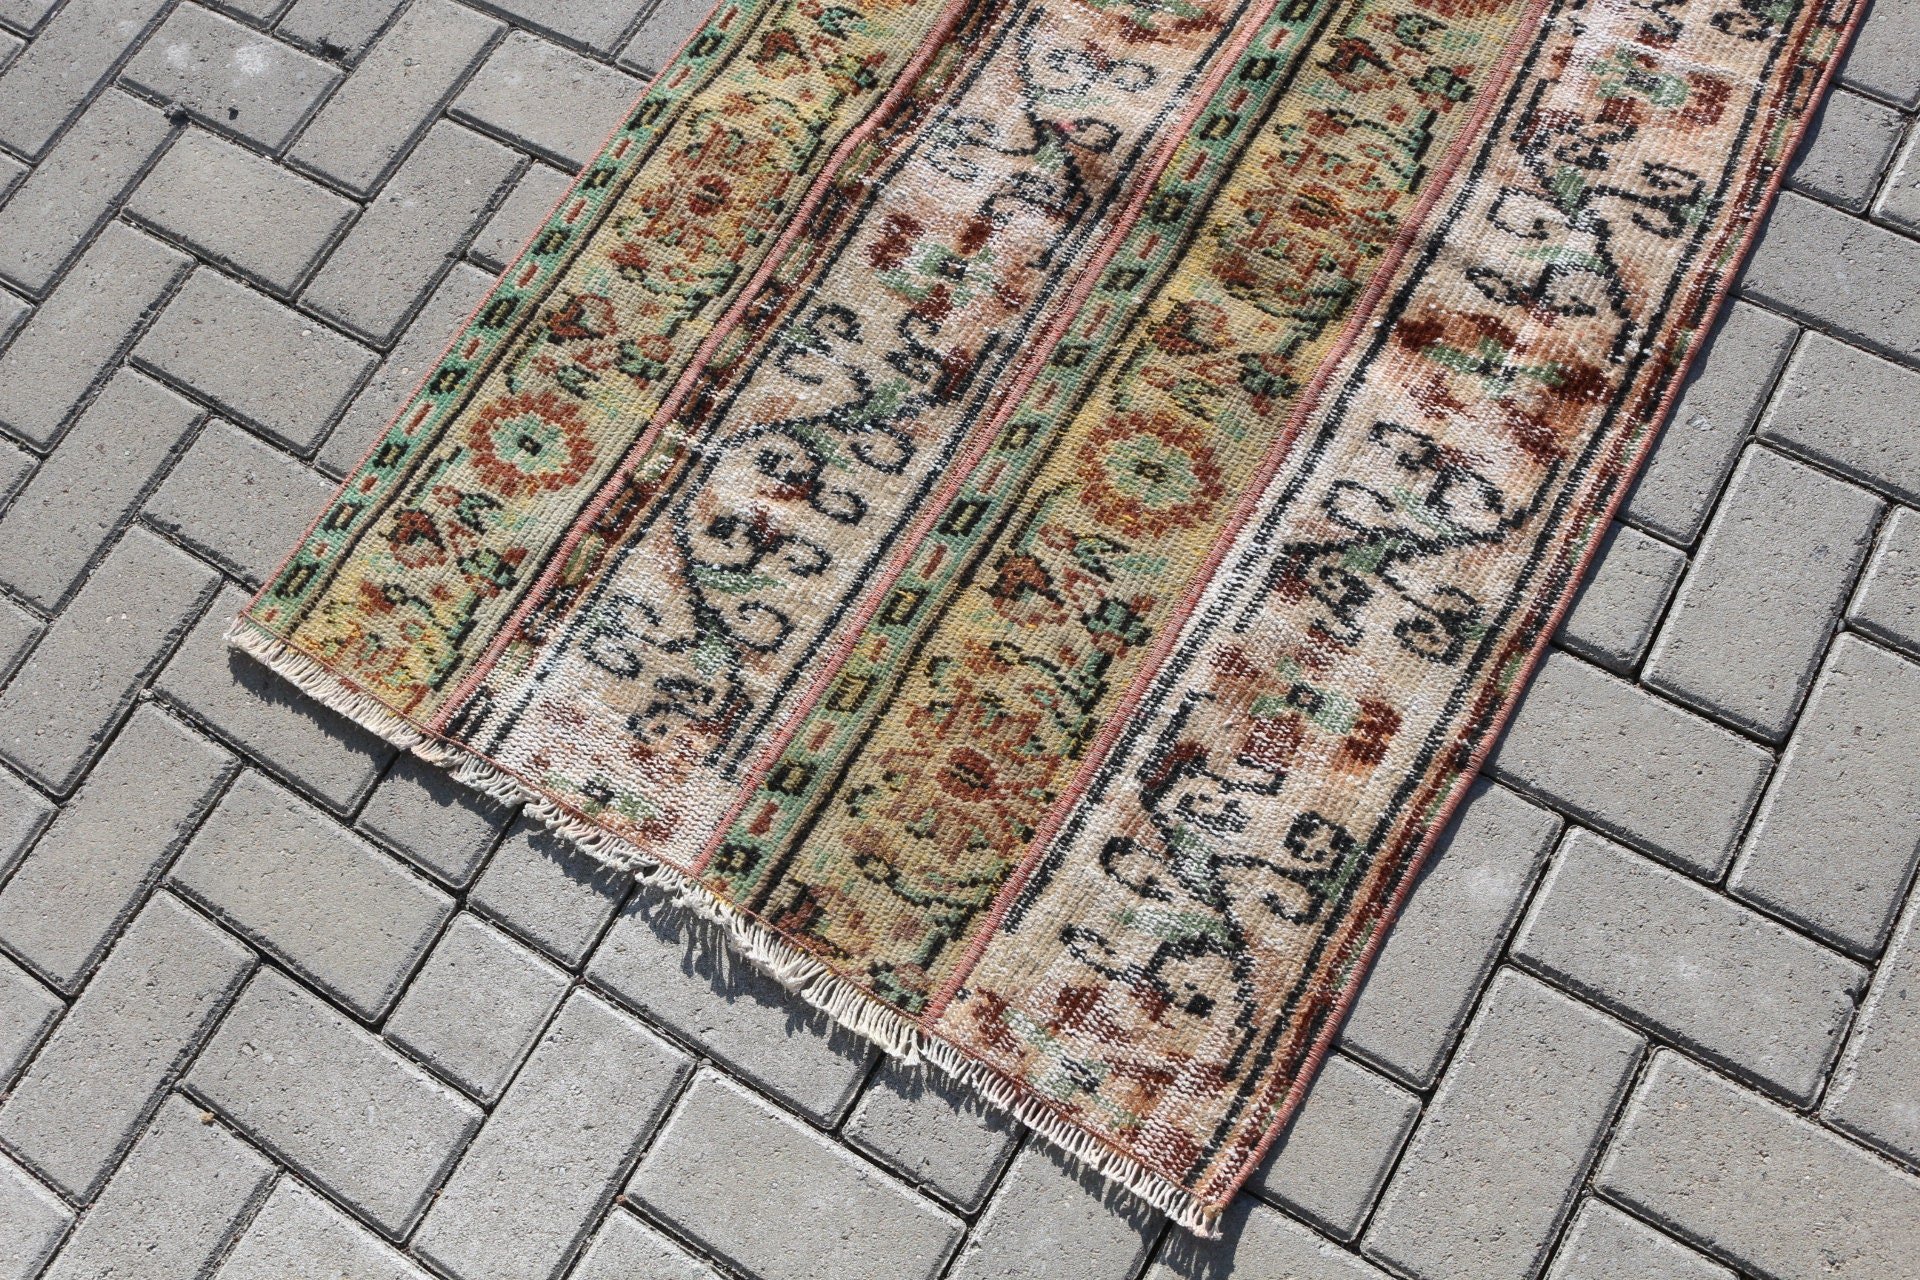 Rugs for Kitchen, 2.6x3.6 ft Small Rugs, Wall Hanging Rug, Entry Rug, Oriental Rug, Vintage Rugs, Turkish Rugs, Cool Rug, Green Oushak Rug